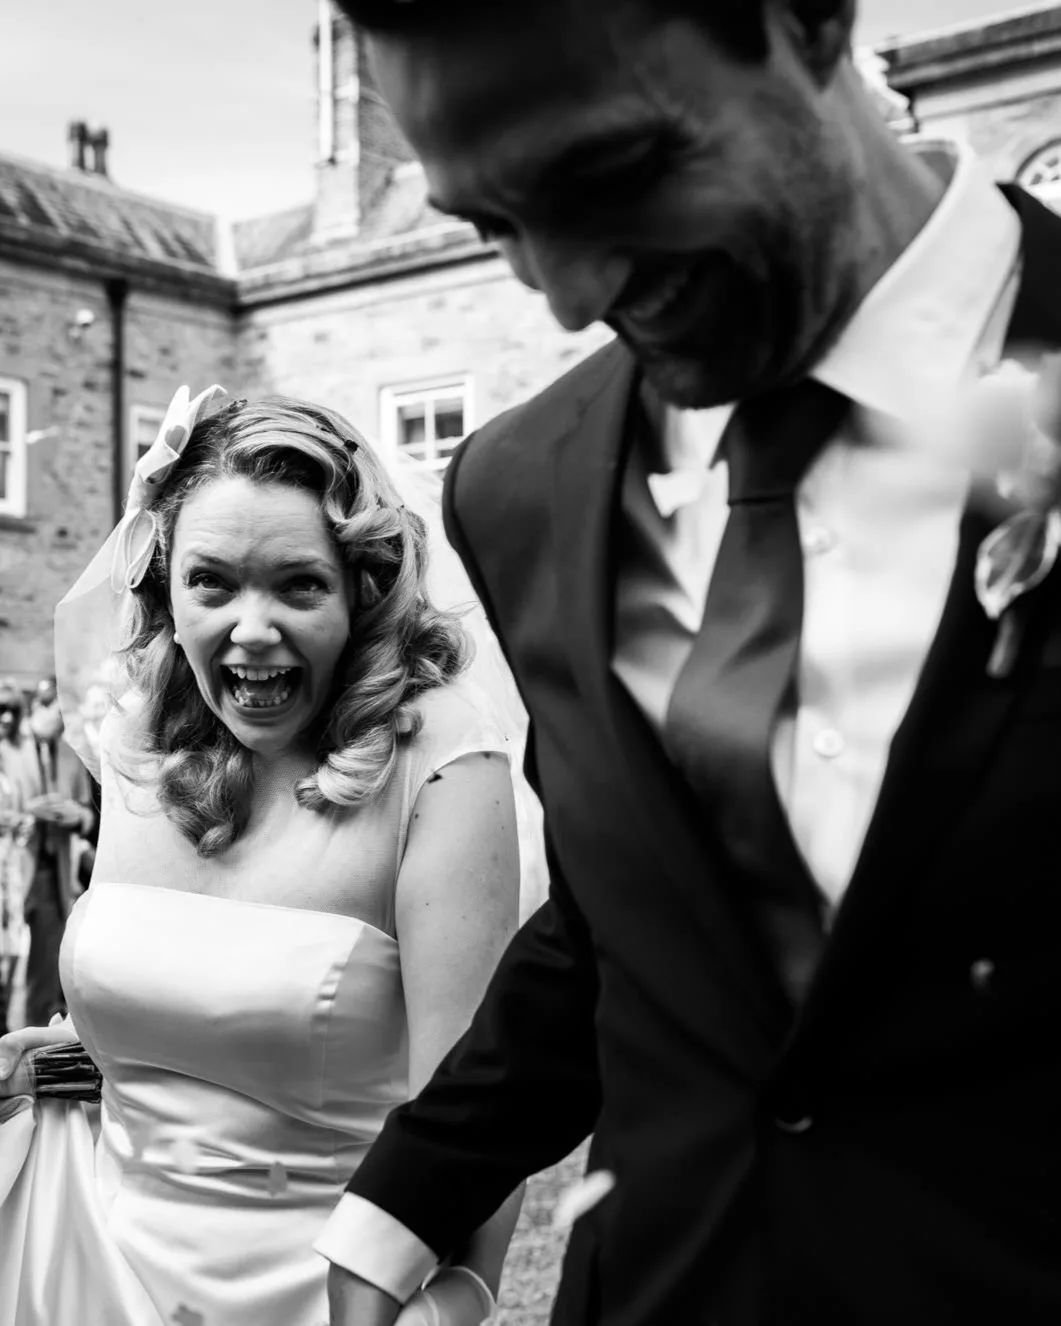 Rachel &amp; Rick bracing themselves for the oncoming confetti in the face run.

@whitworthhall

#whitworthhall #northeastweddingphotographer #confetti #blackandwhitewedding #candidweddingphotography #2025bride